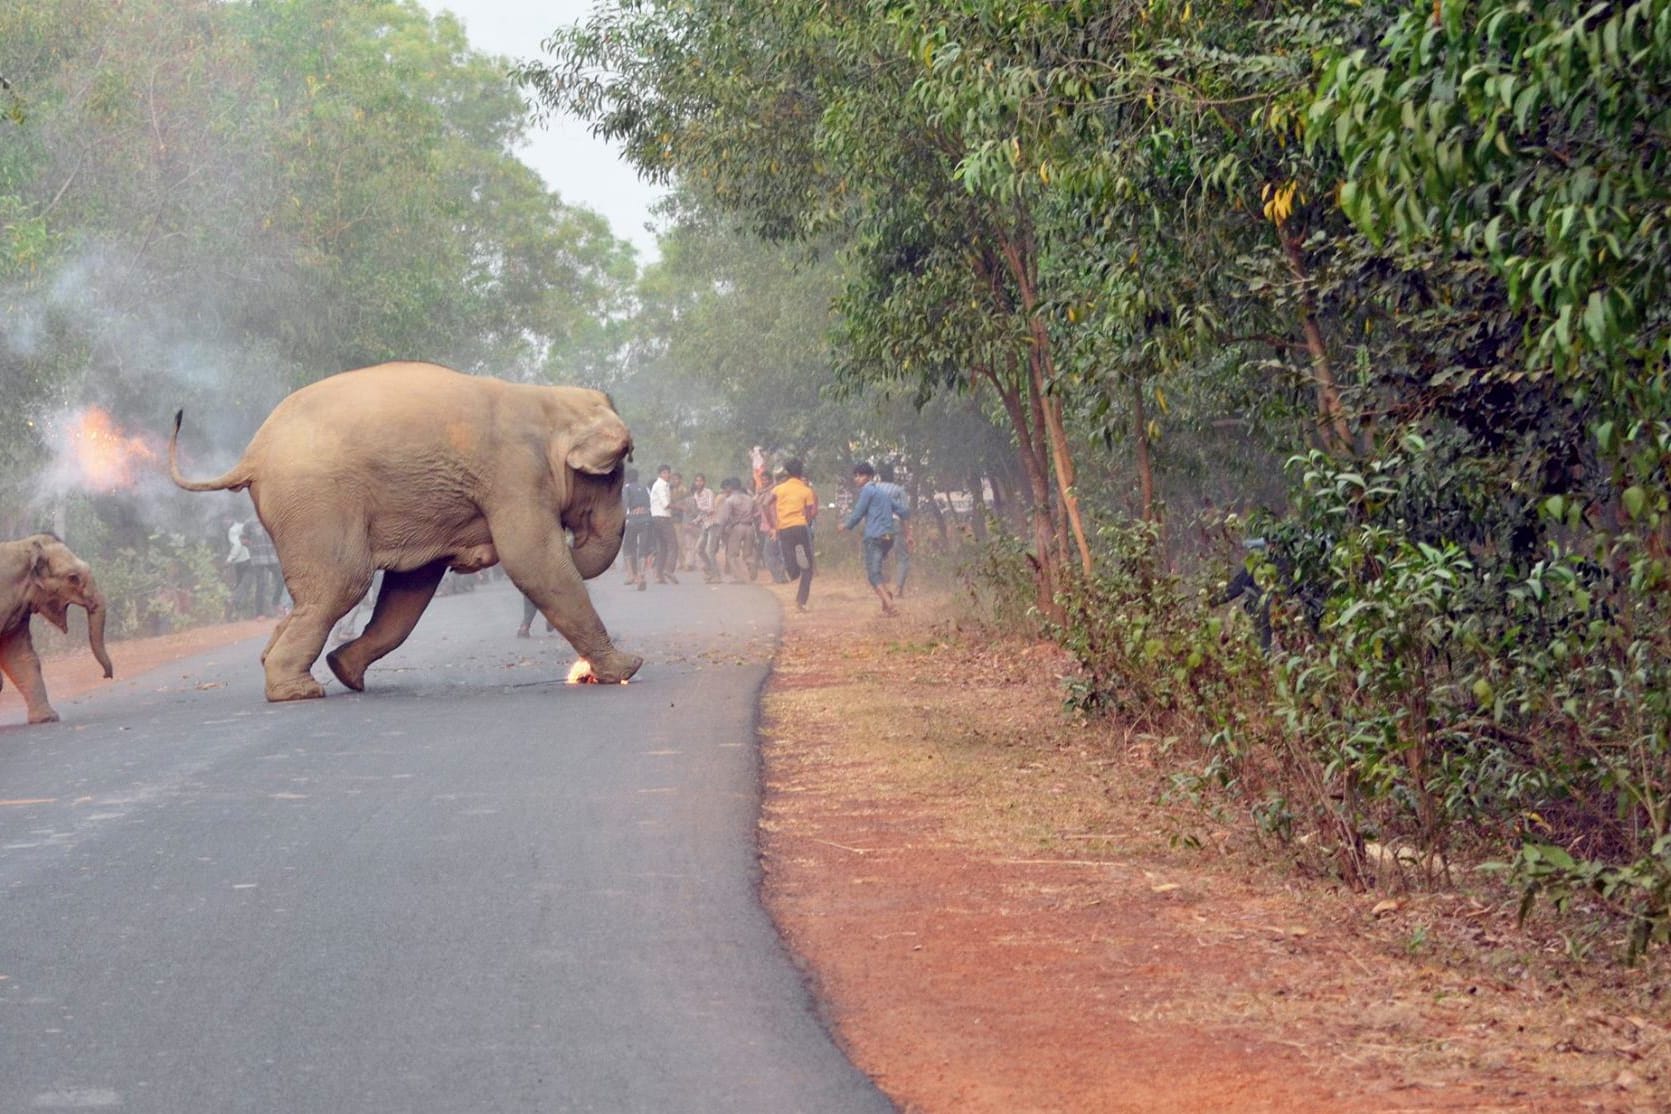 The image, which RNZ has cropped, won an award for highlighting humna-elephant conflict.